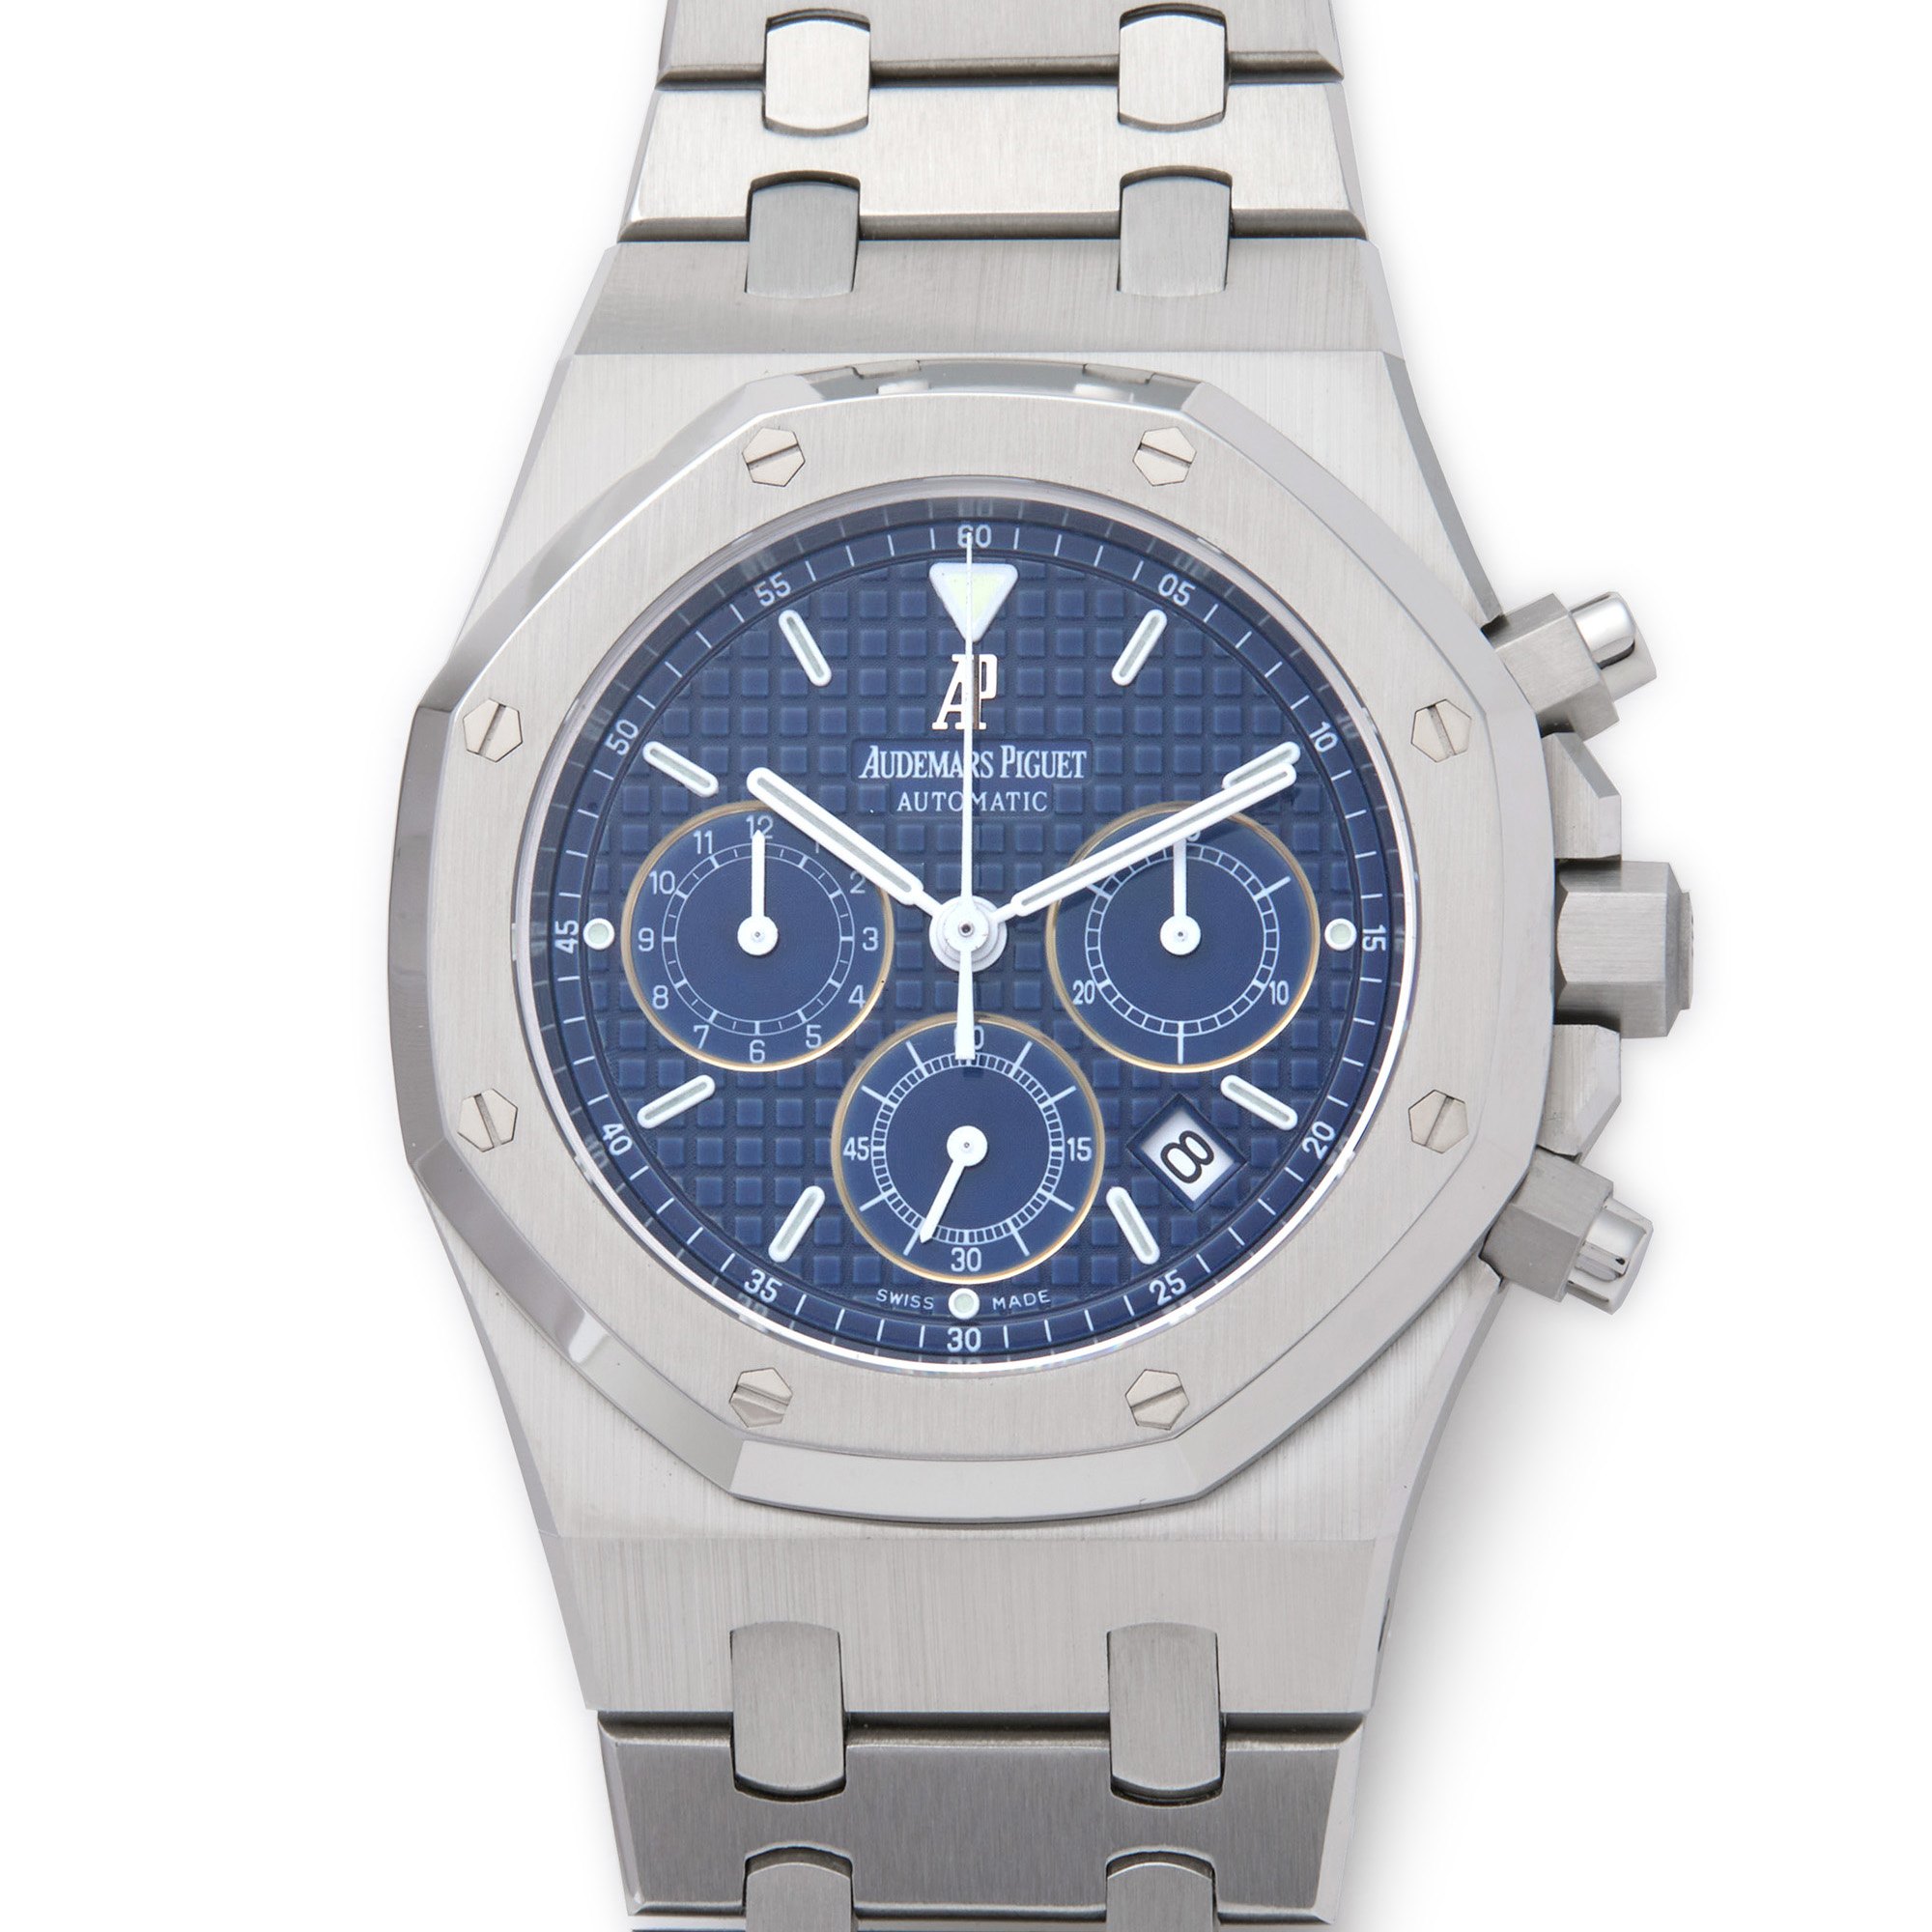 Audemars Piguet Royal Oak Chronograph Cosmos Dial Stainless Steel 25860ST.OO.1110ST.04